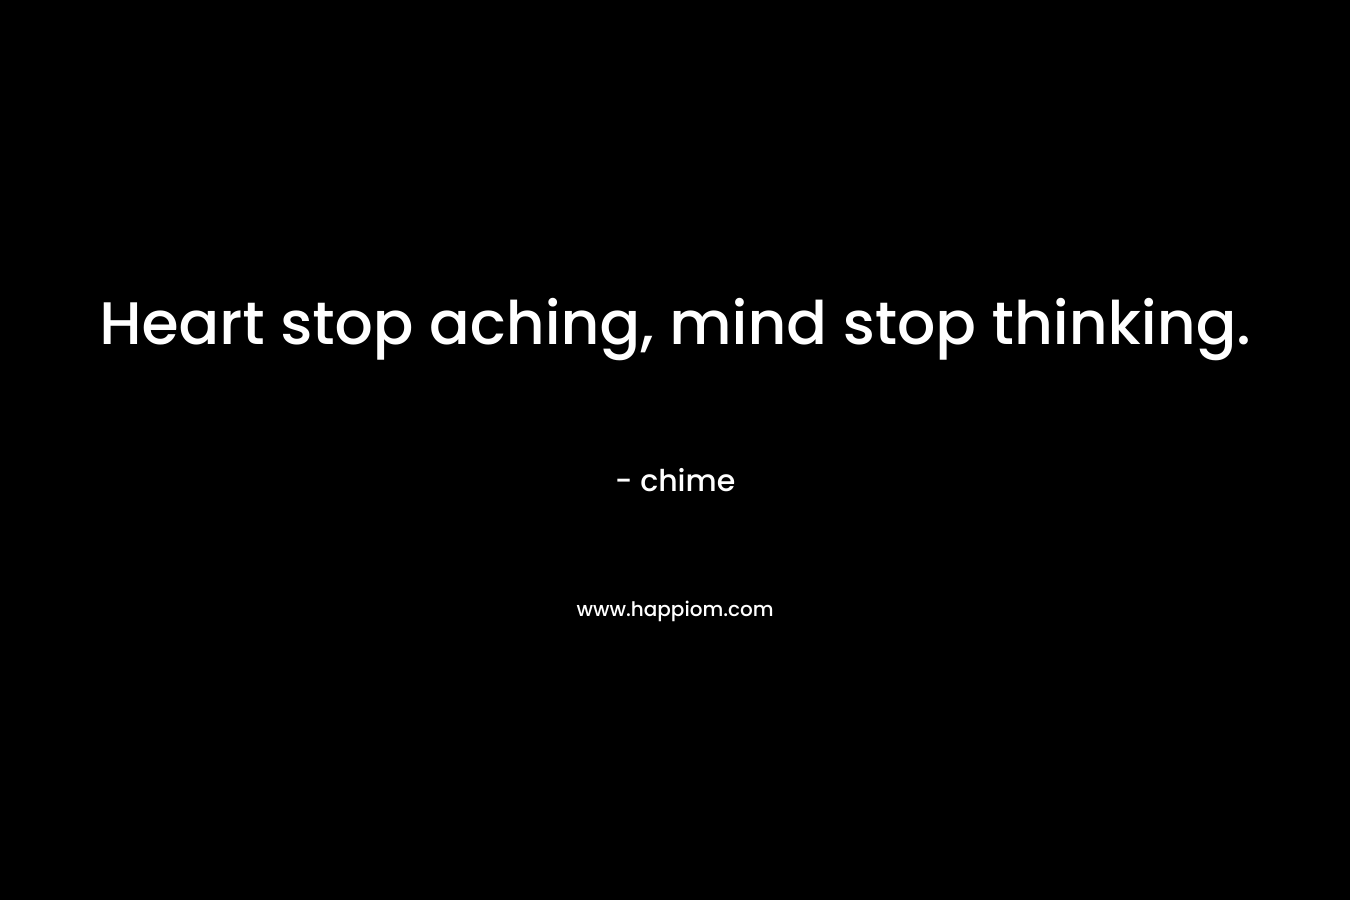 Heart stop aching, mind stop thinking. – chime